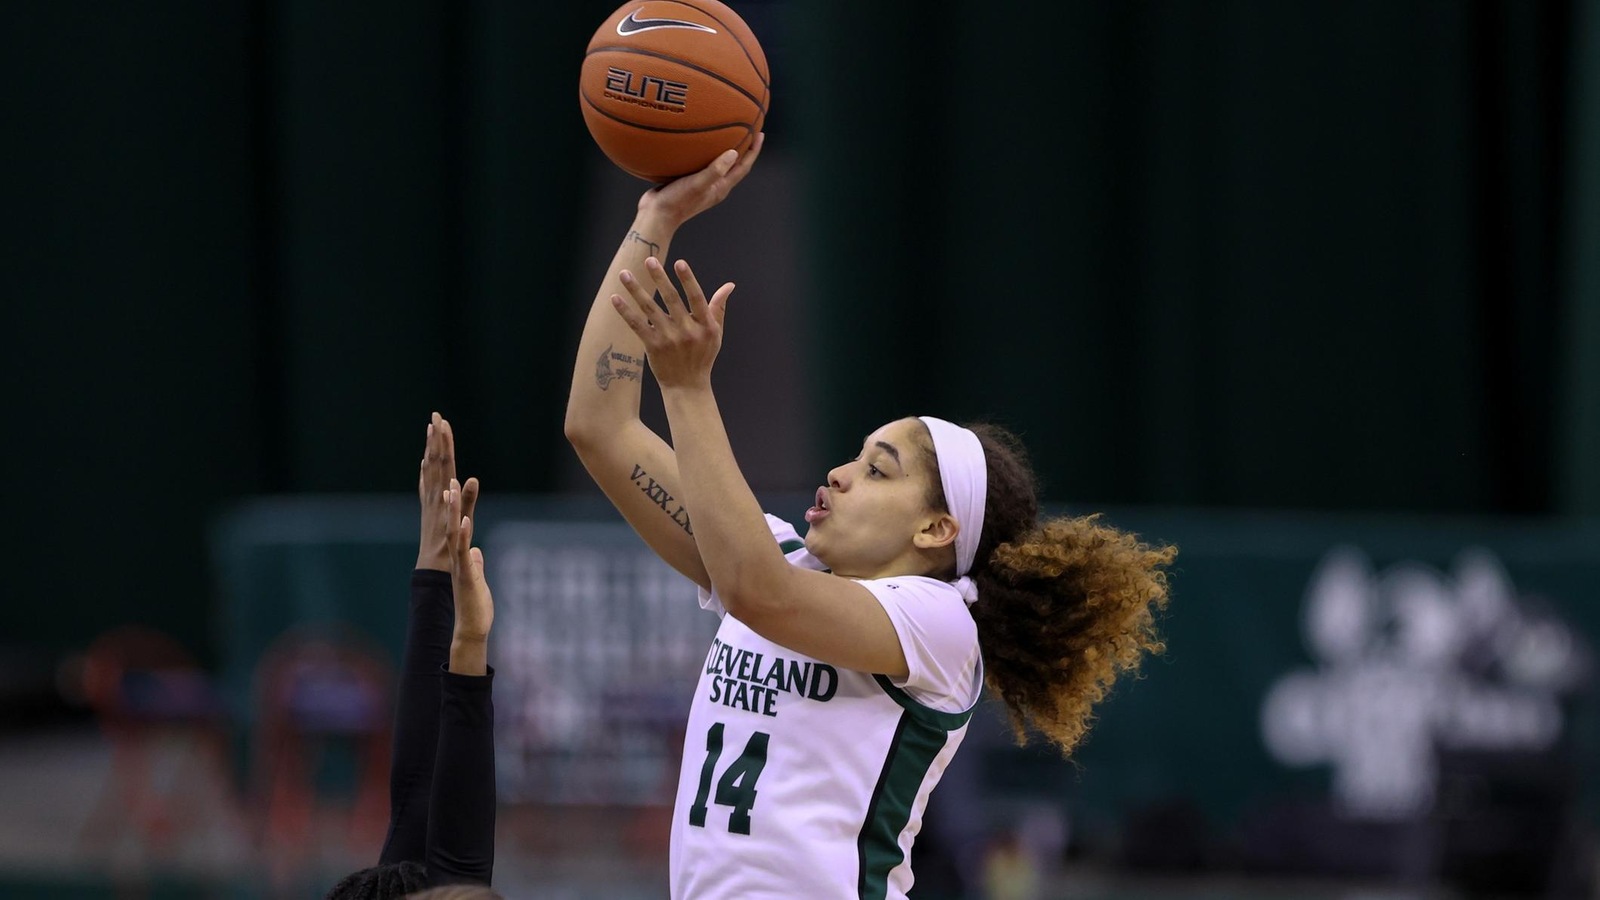 Vikings Earn 69-43 Victory Over UIC In #HLWBB First Round